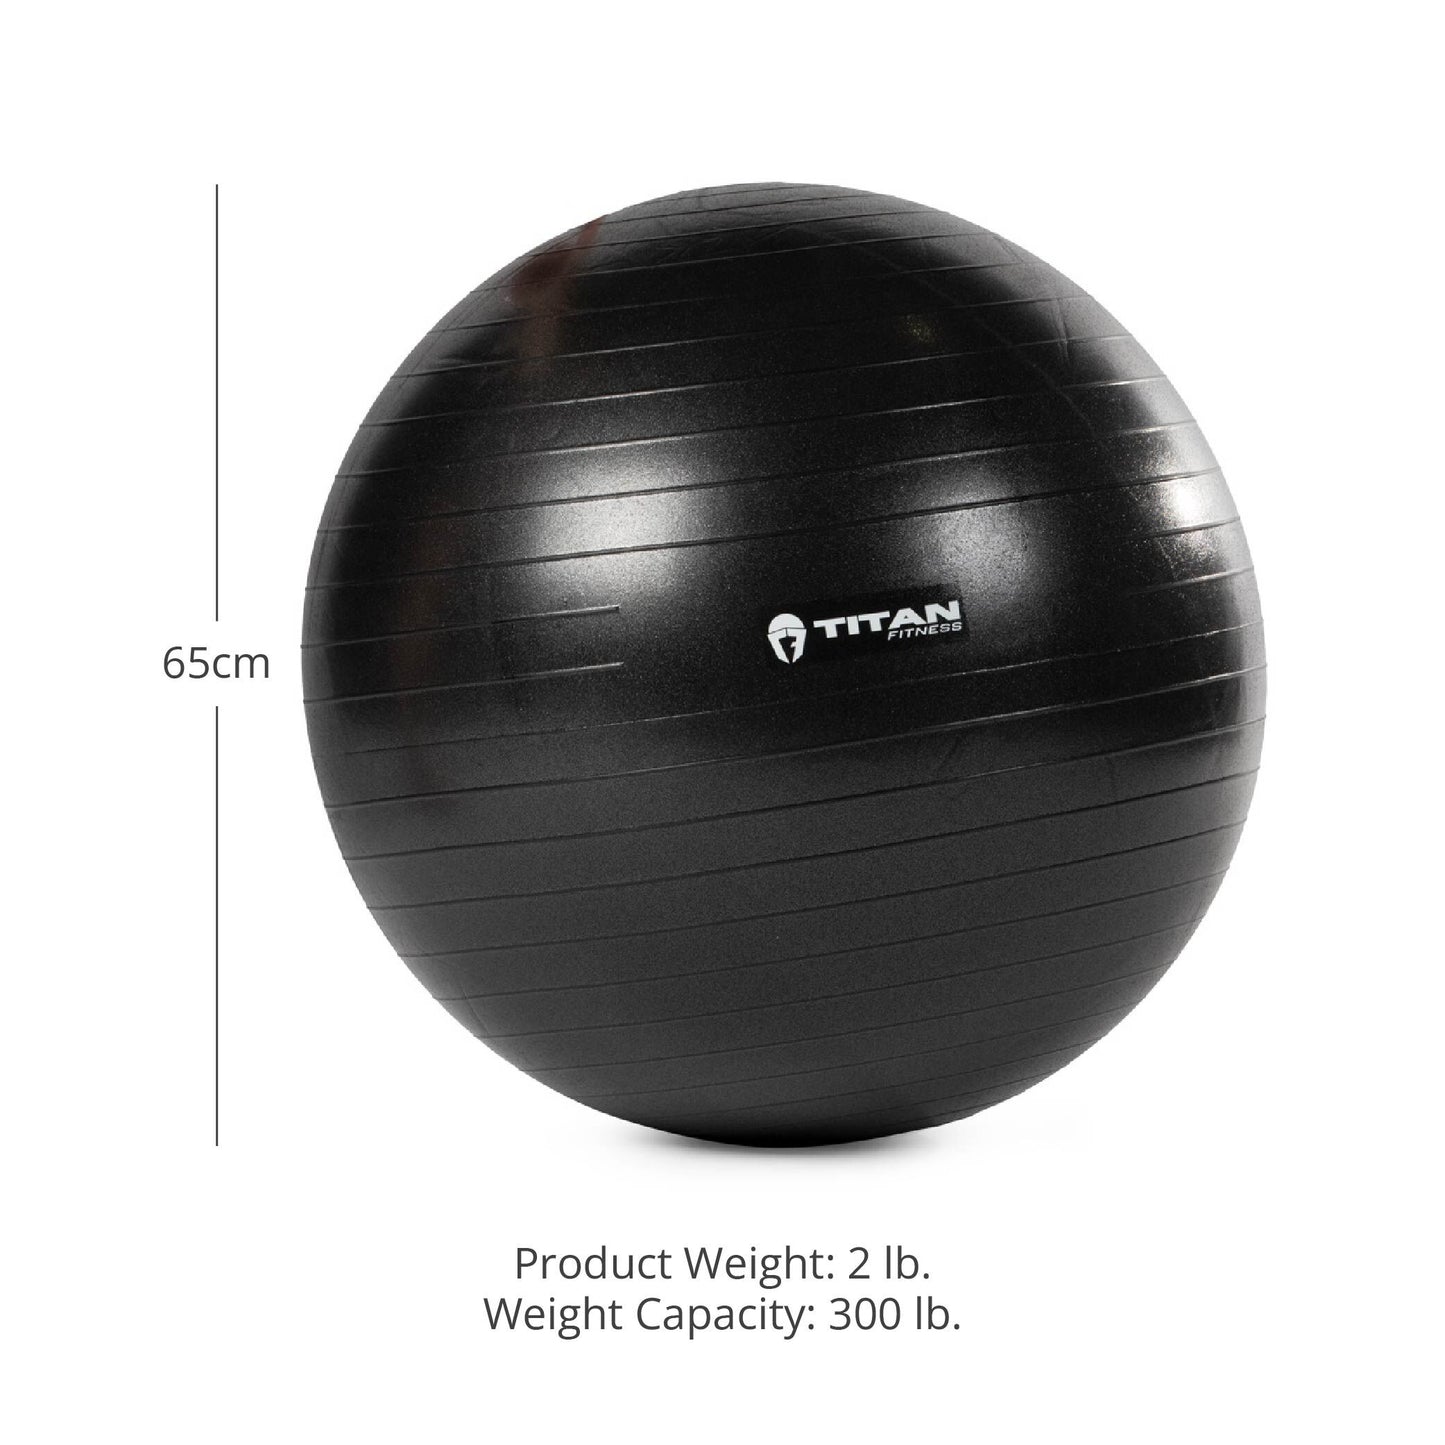 65cm Black Exercise Stability Ball - view 4